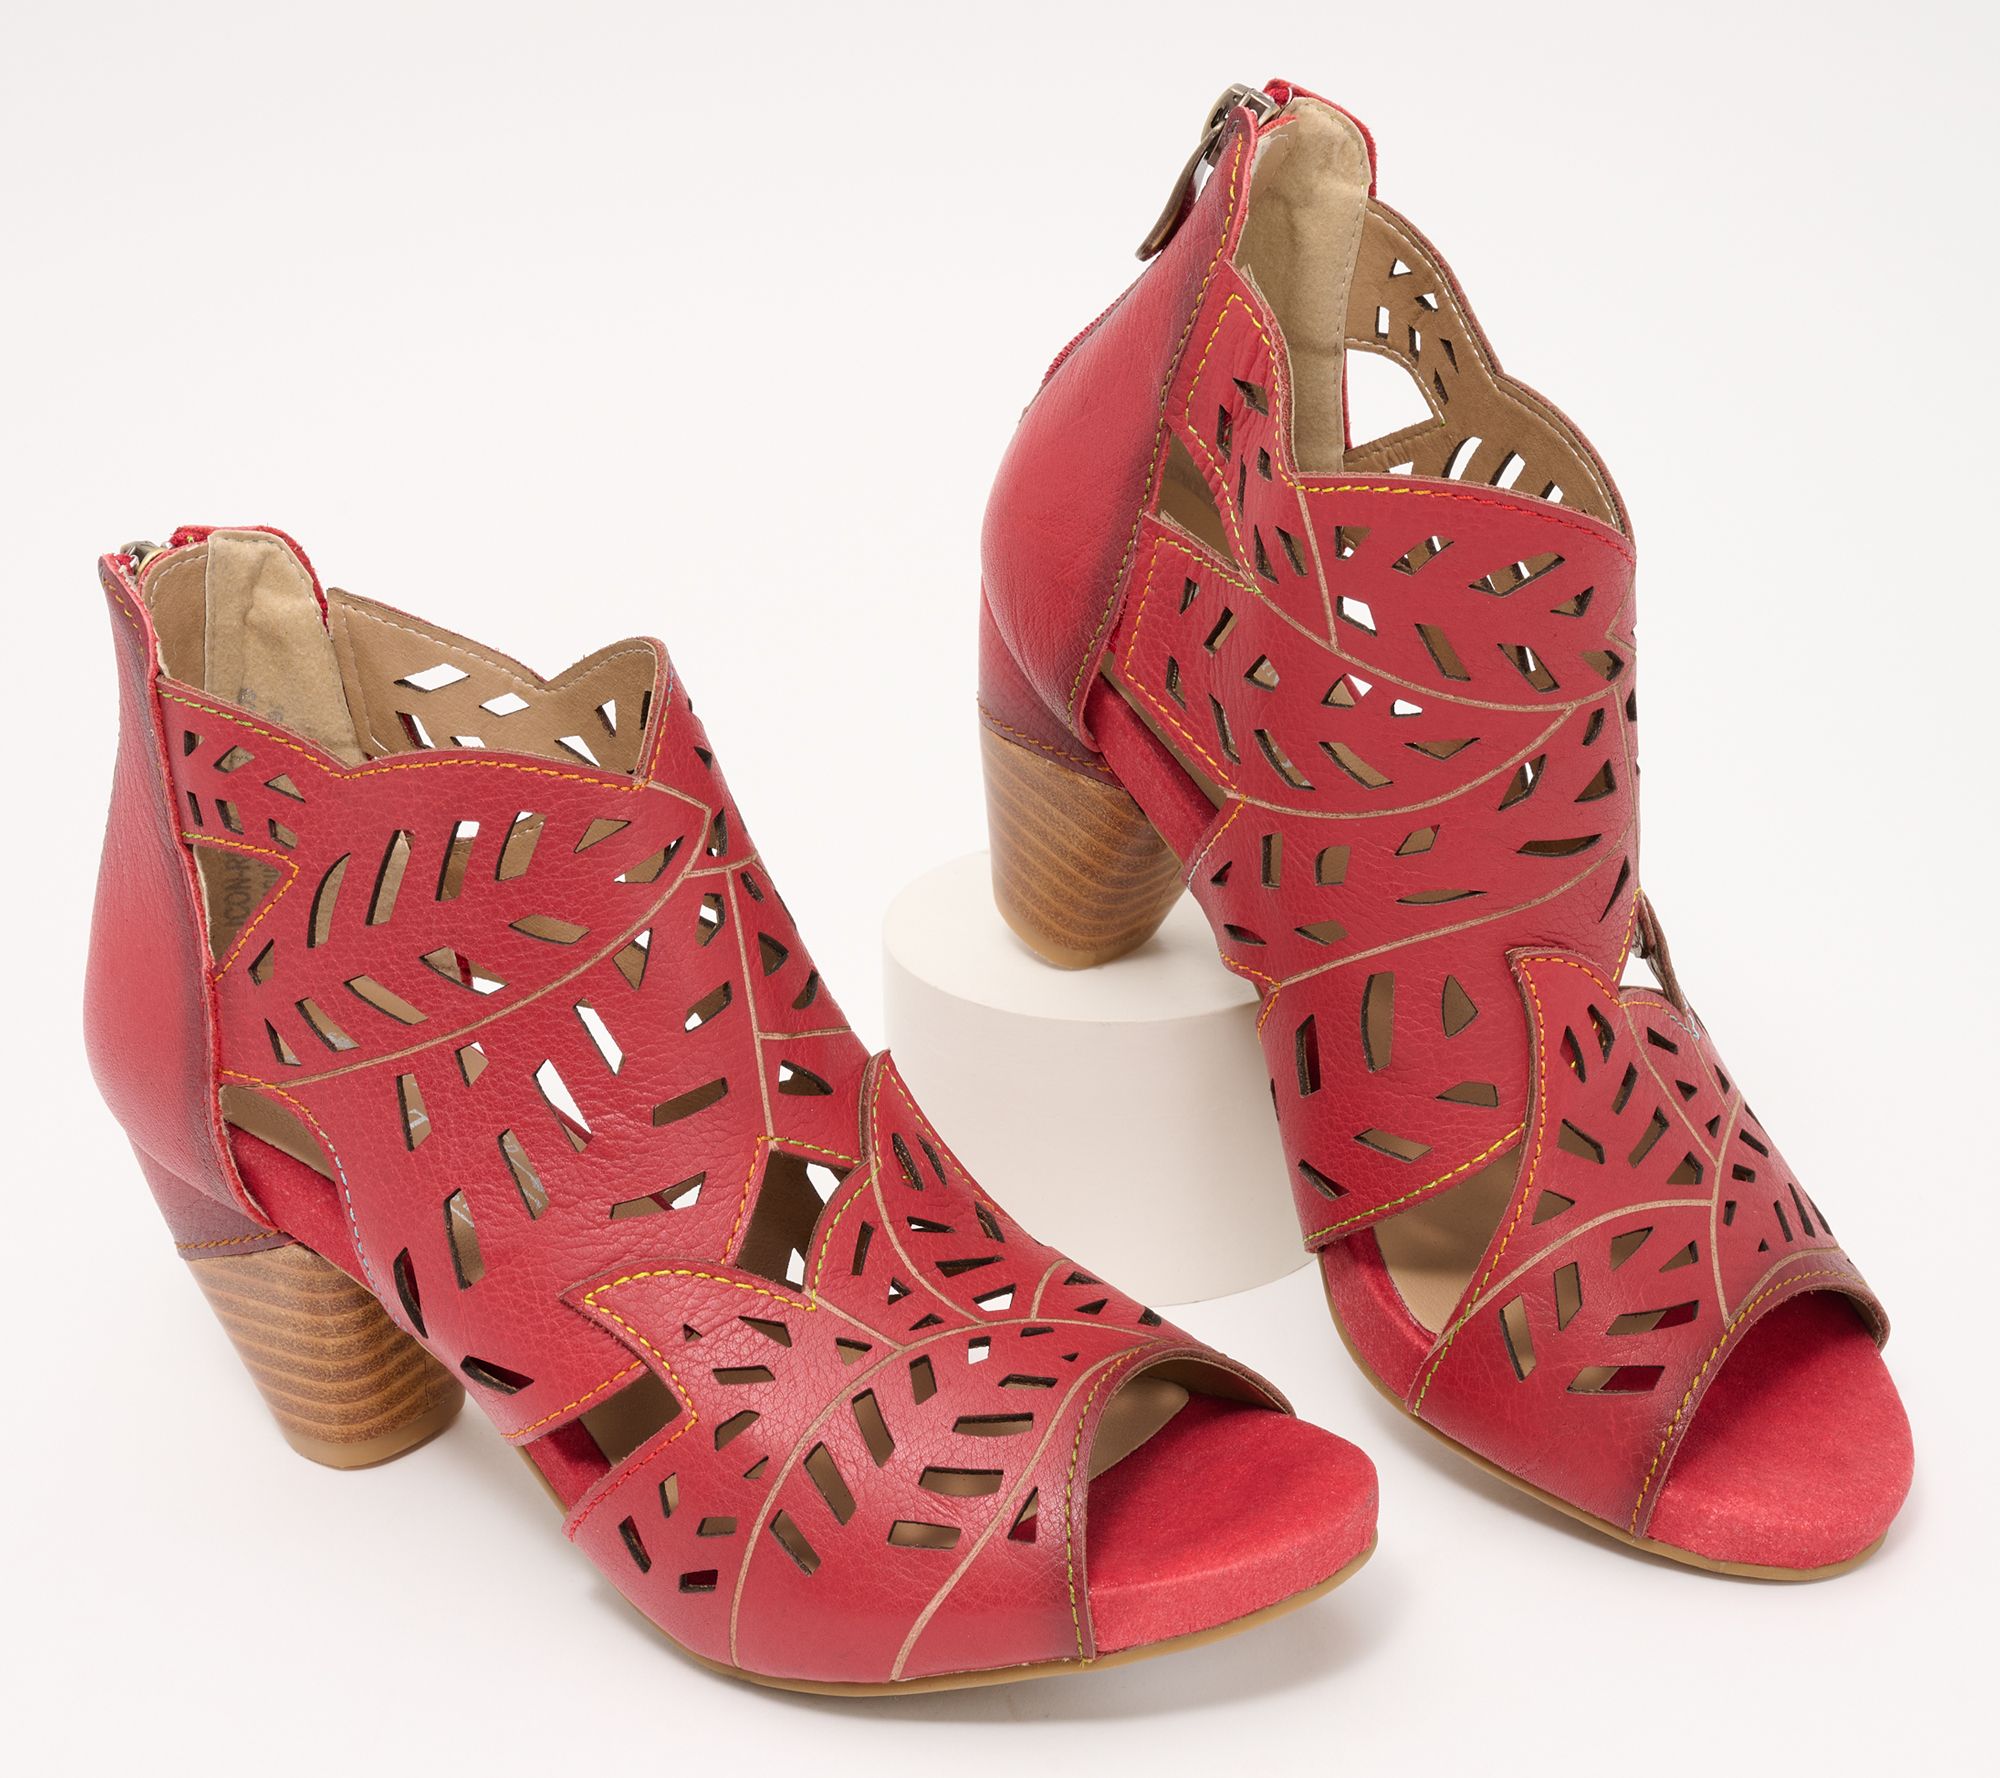 L'Artiste by Spring Leather Heeled Sandals - Icon QVC.com